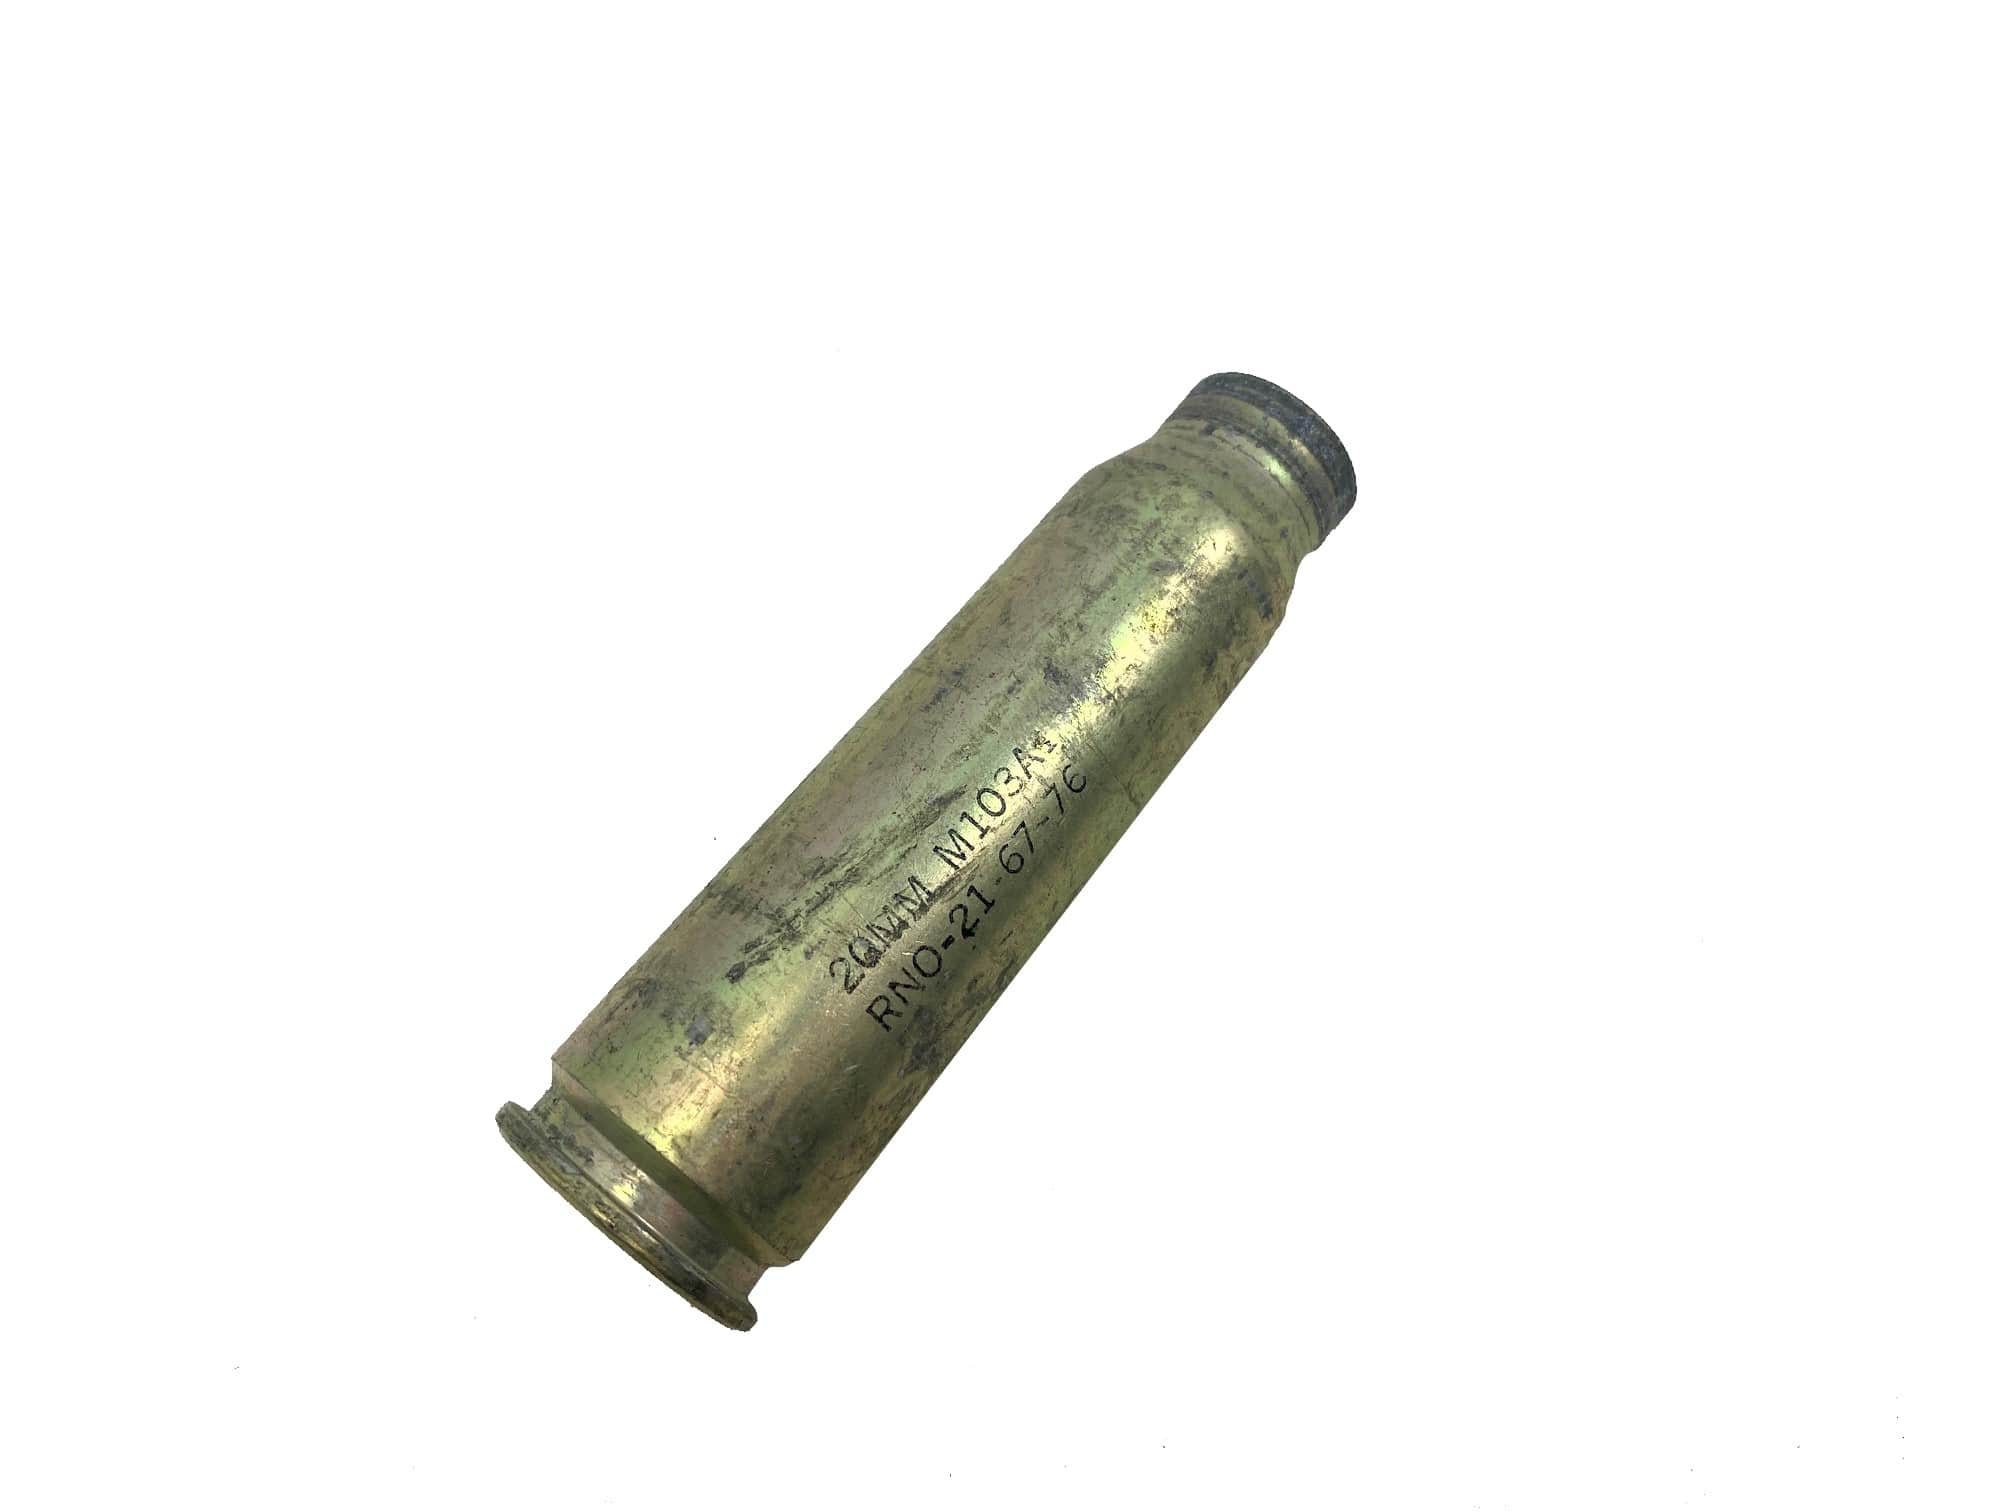 20mm Shell Casing - Omahas Army Navy Surplus